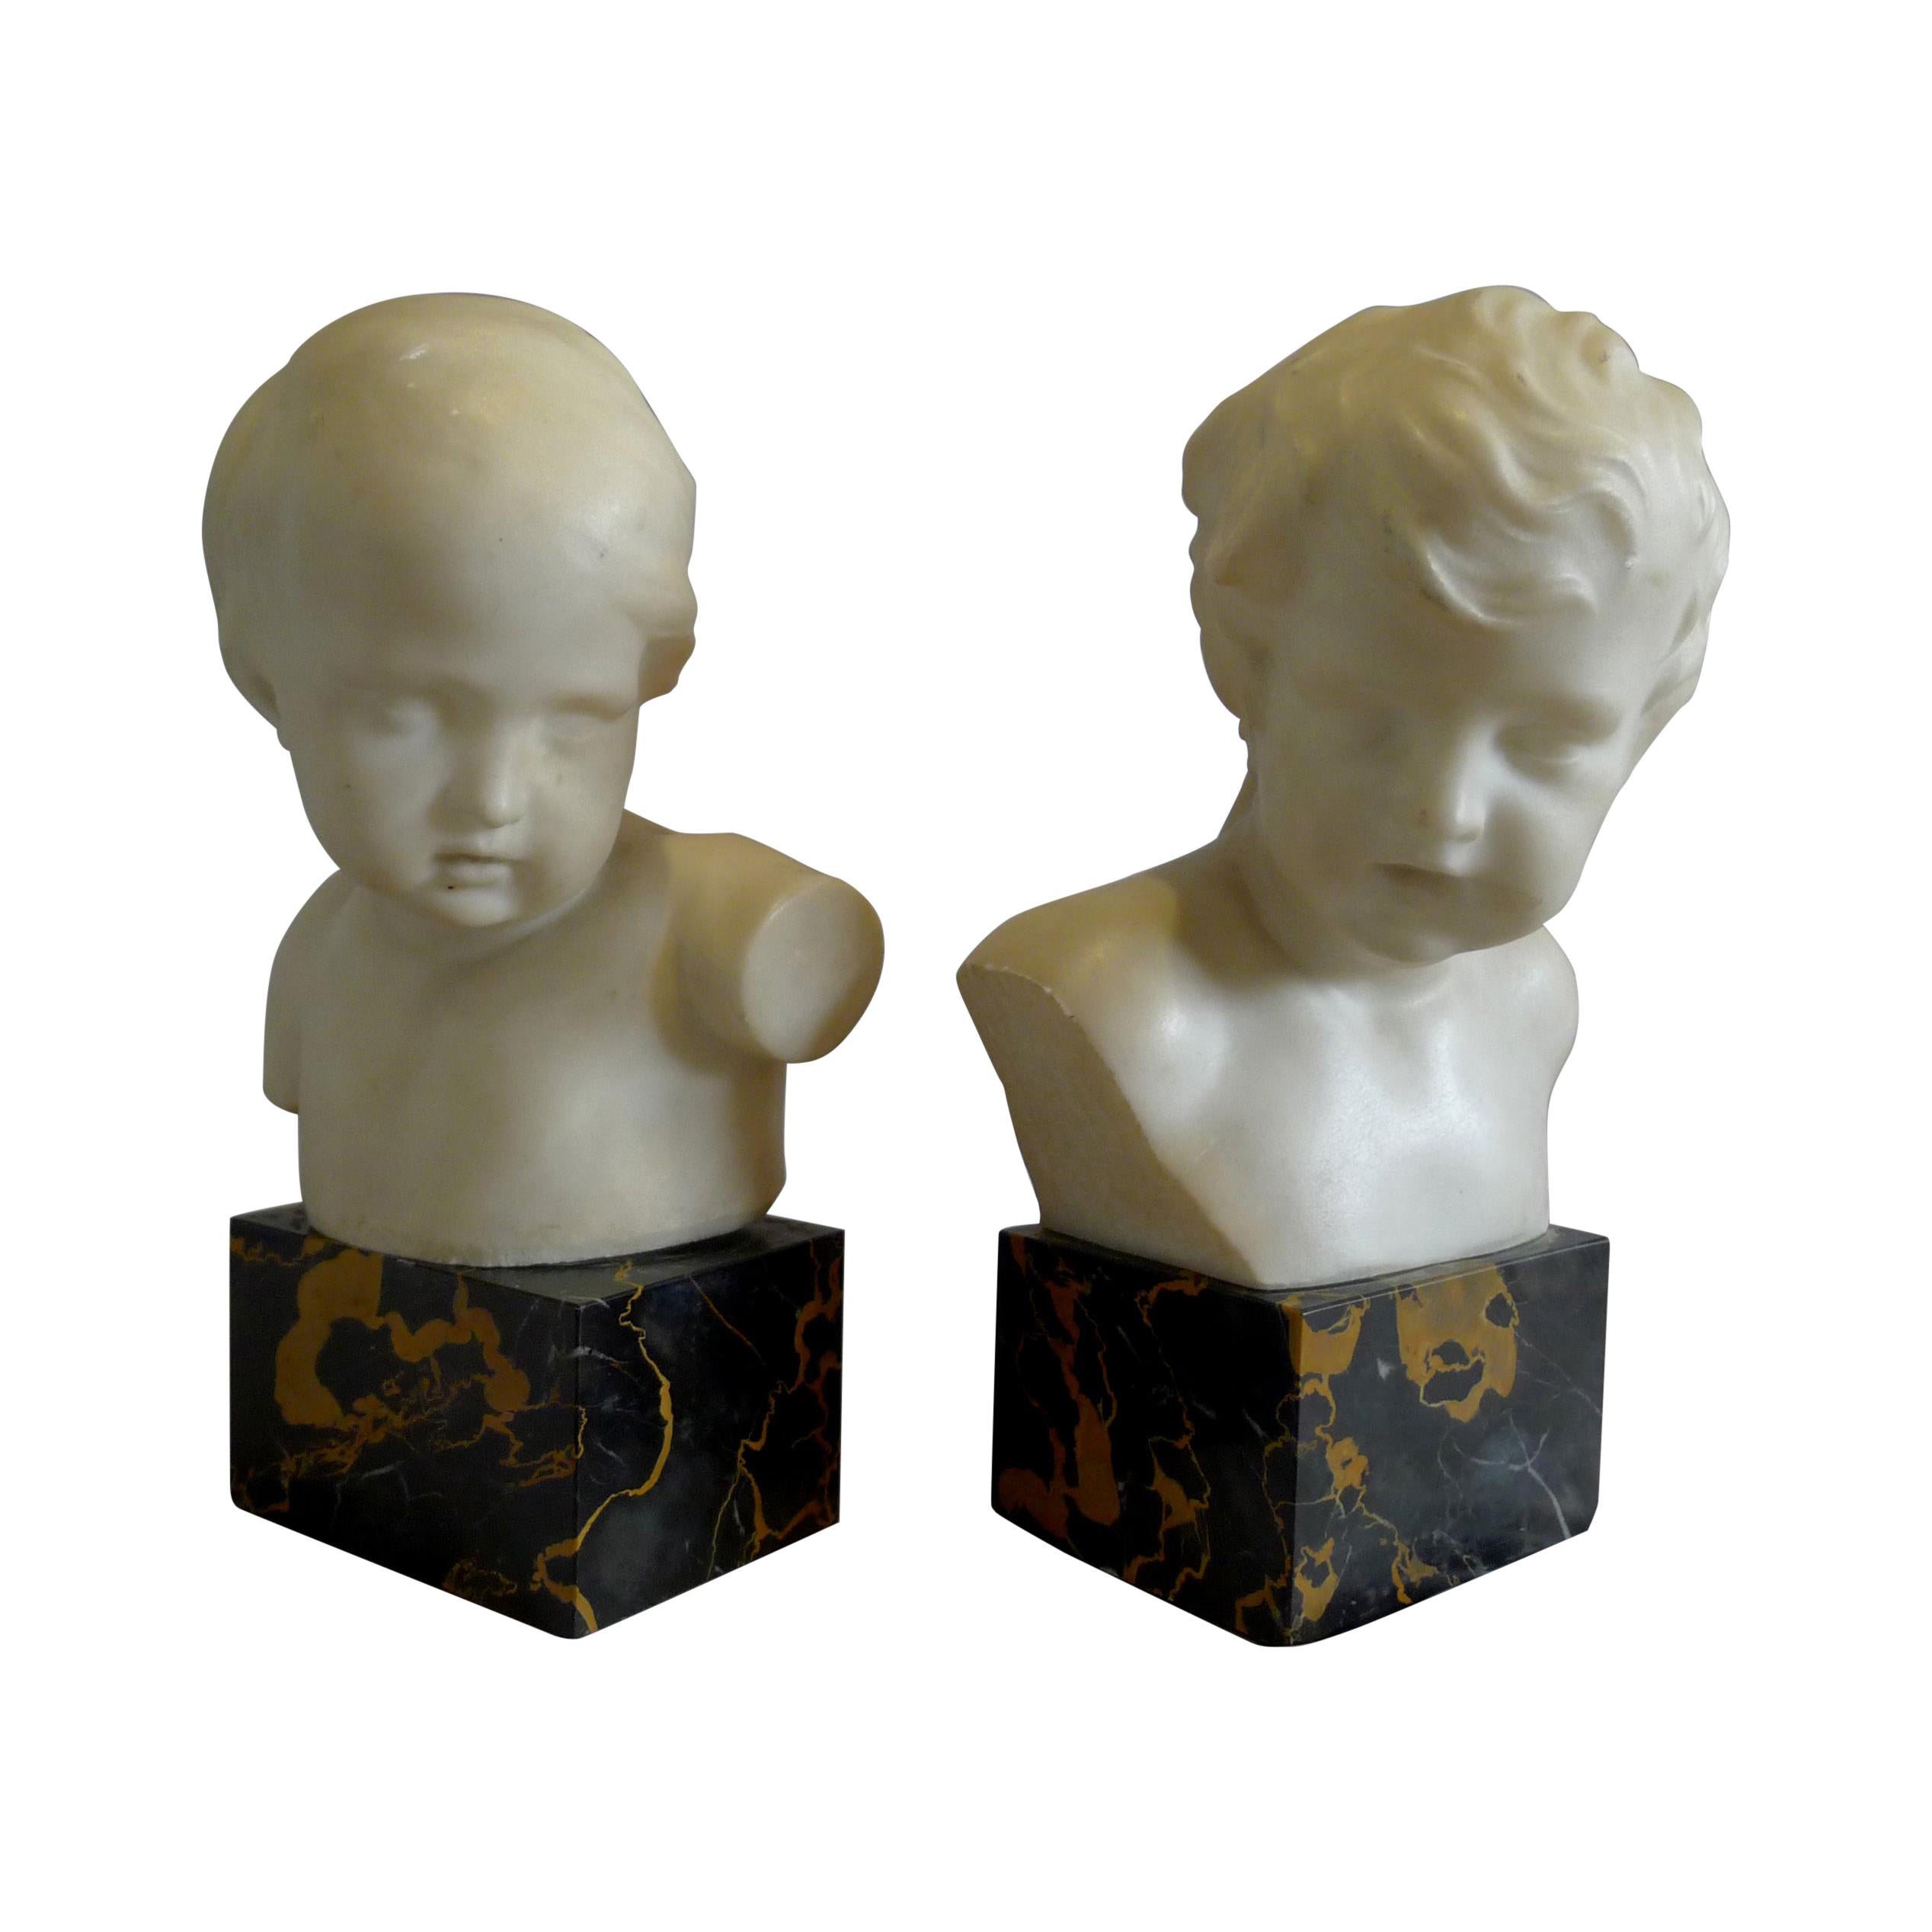 Antique Pair of White Marble Busts of Children on Variegated Marble Bases